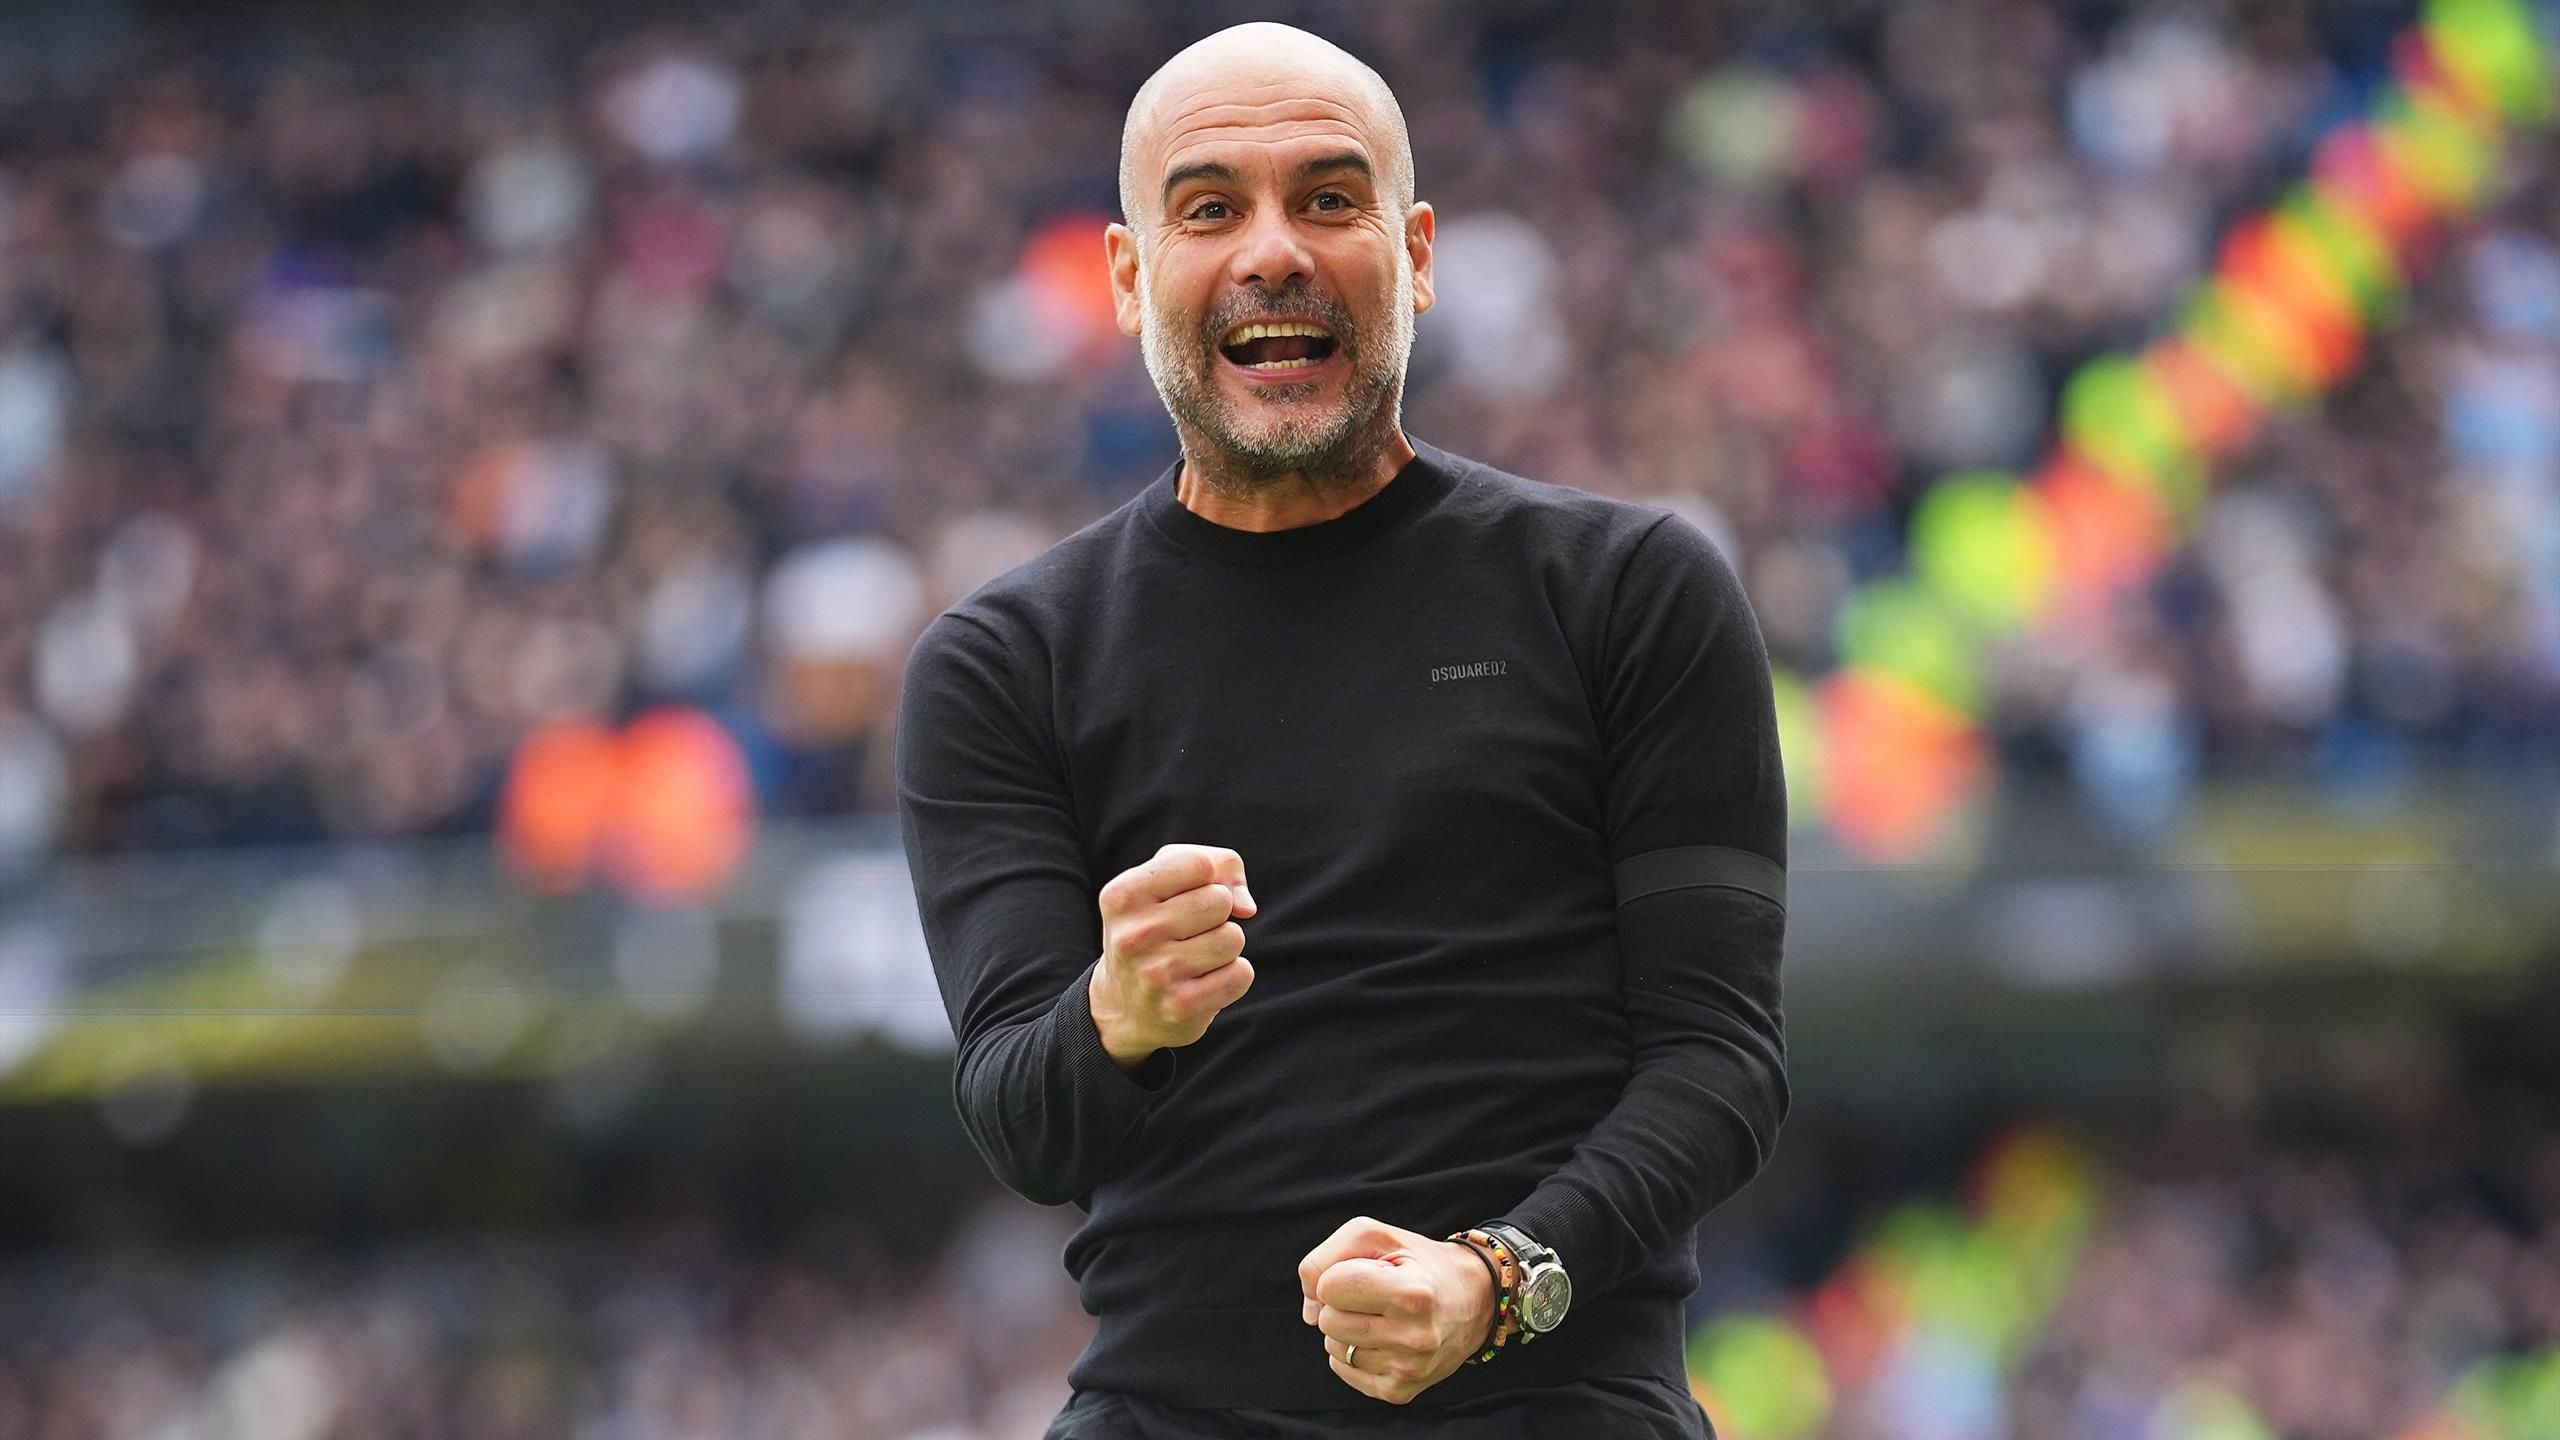 Pep Guardiola on Why Man City is Better than Manchester United